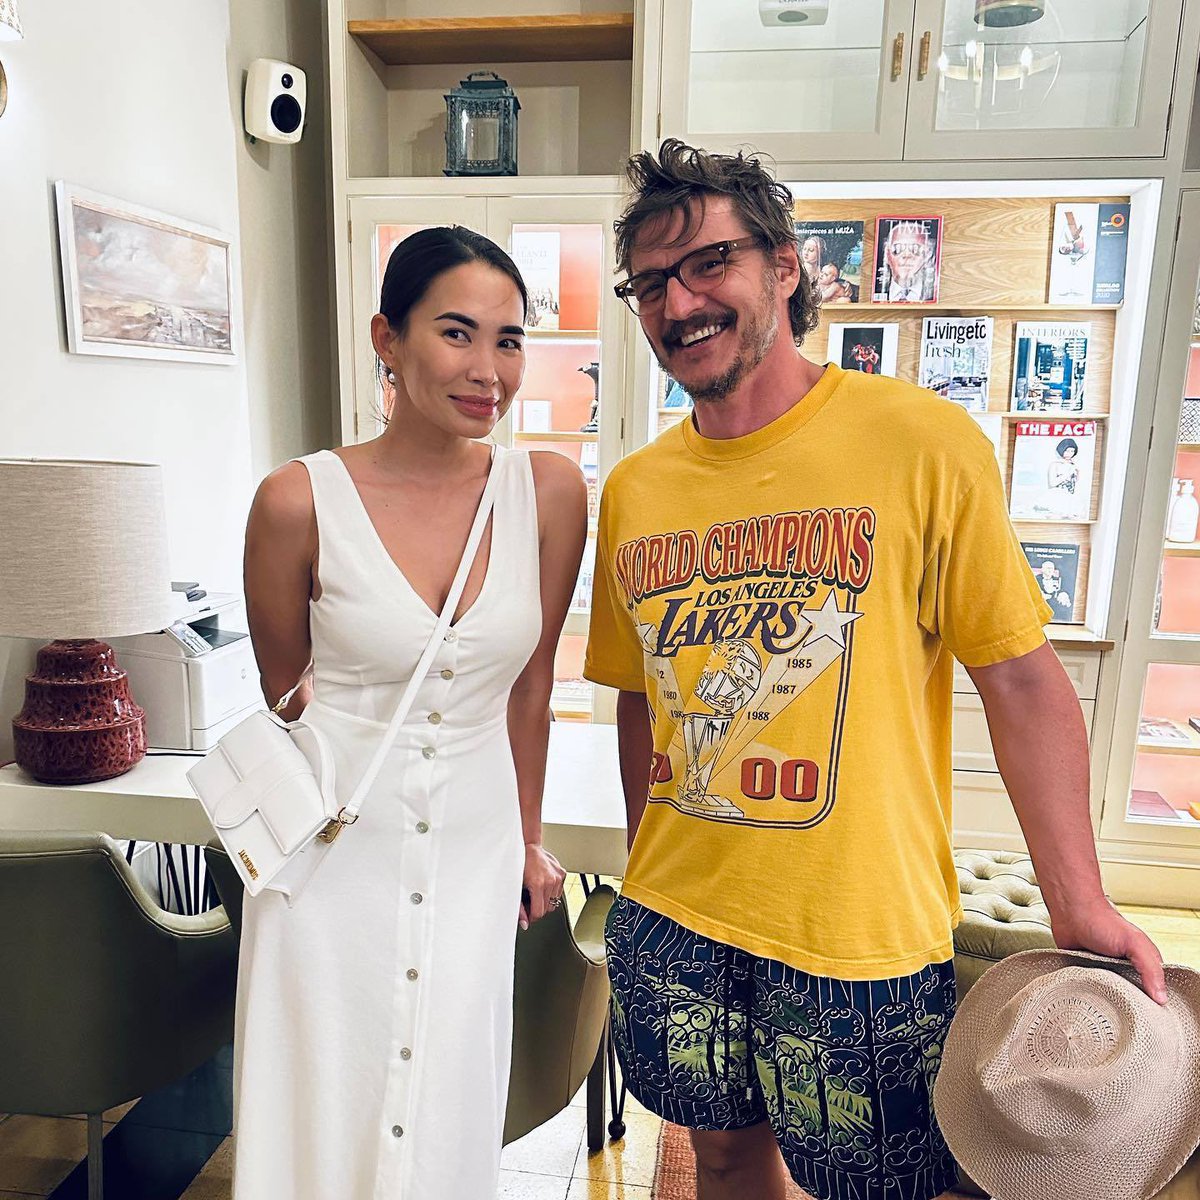 pedro pascal with a fan in morocco today